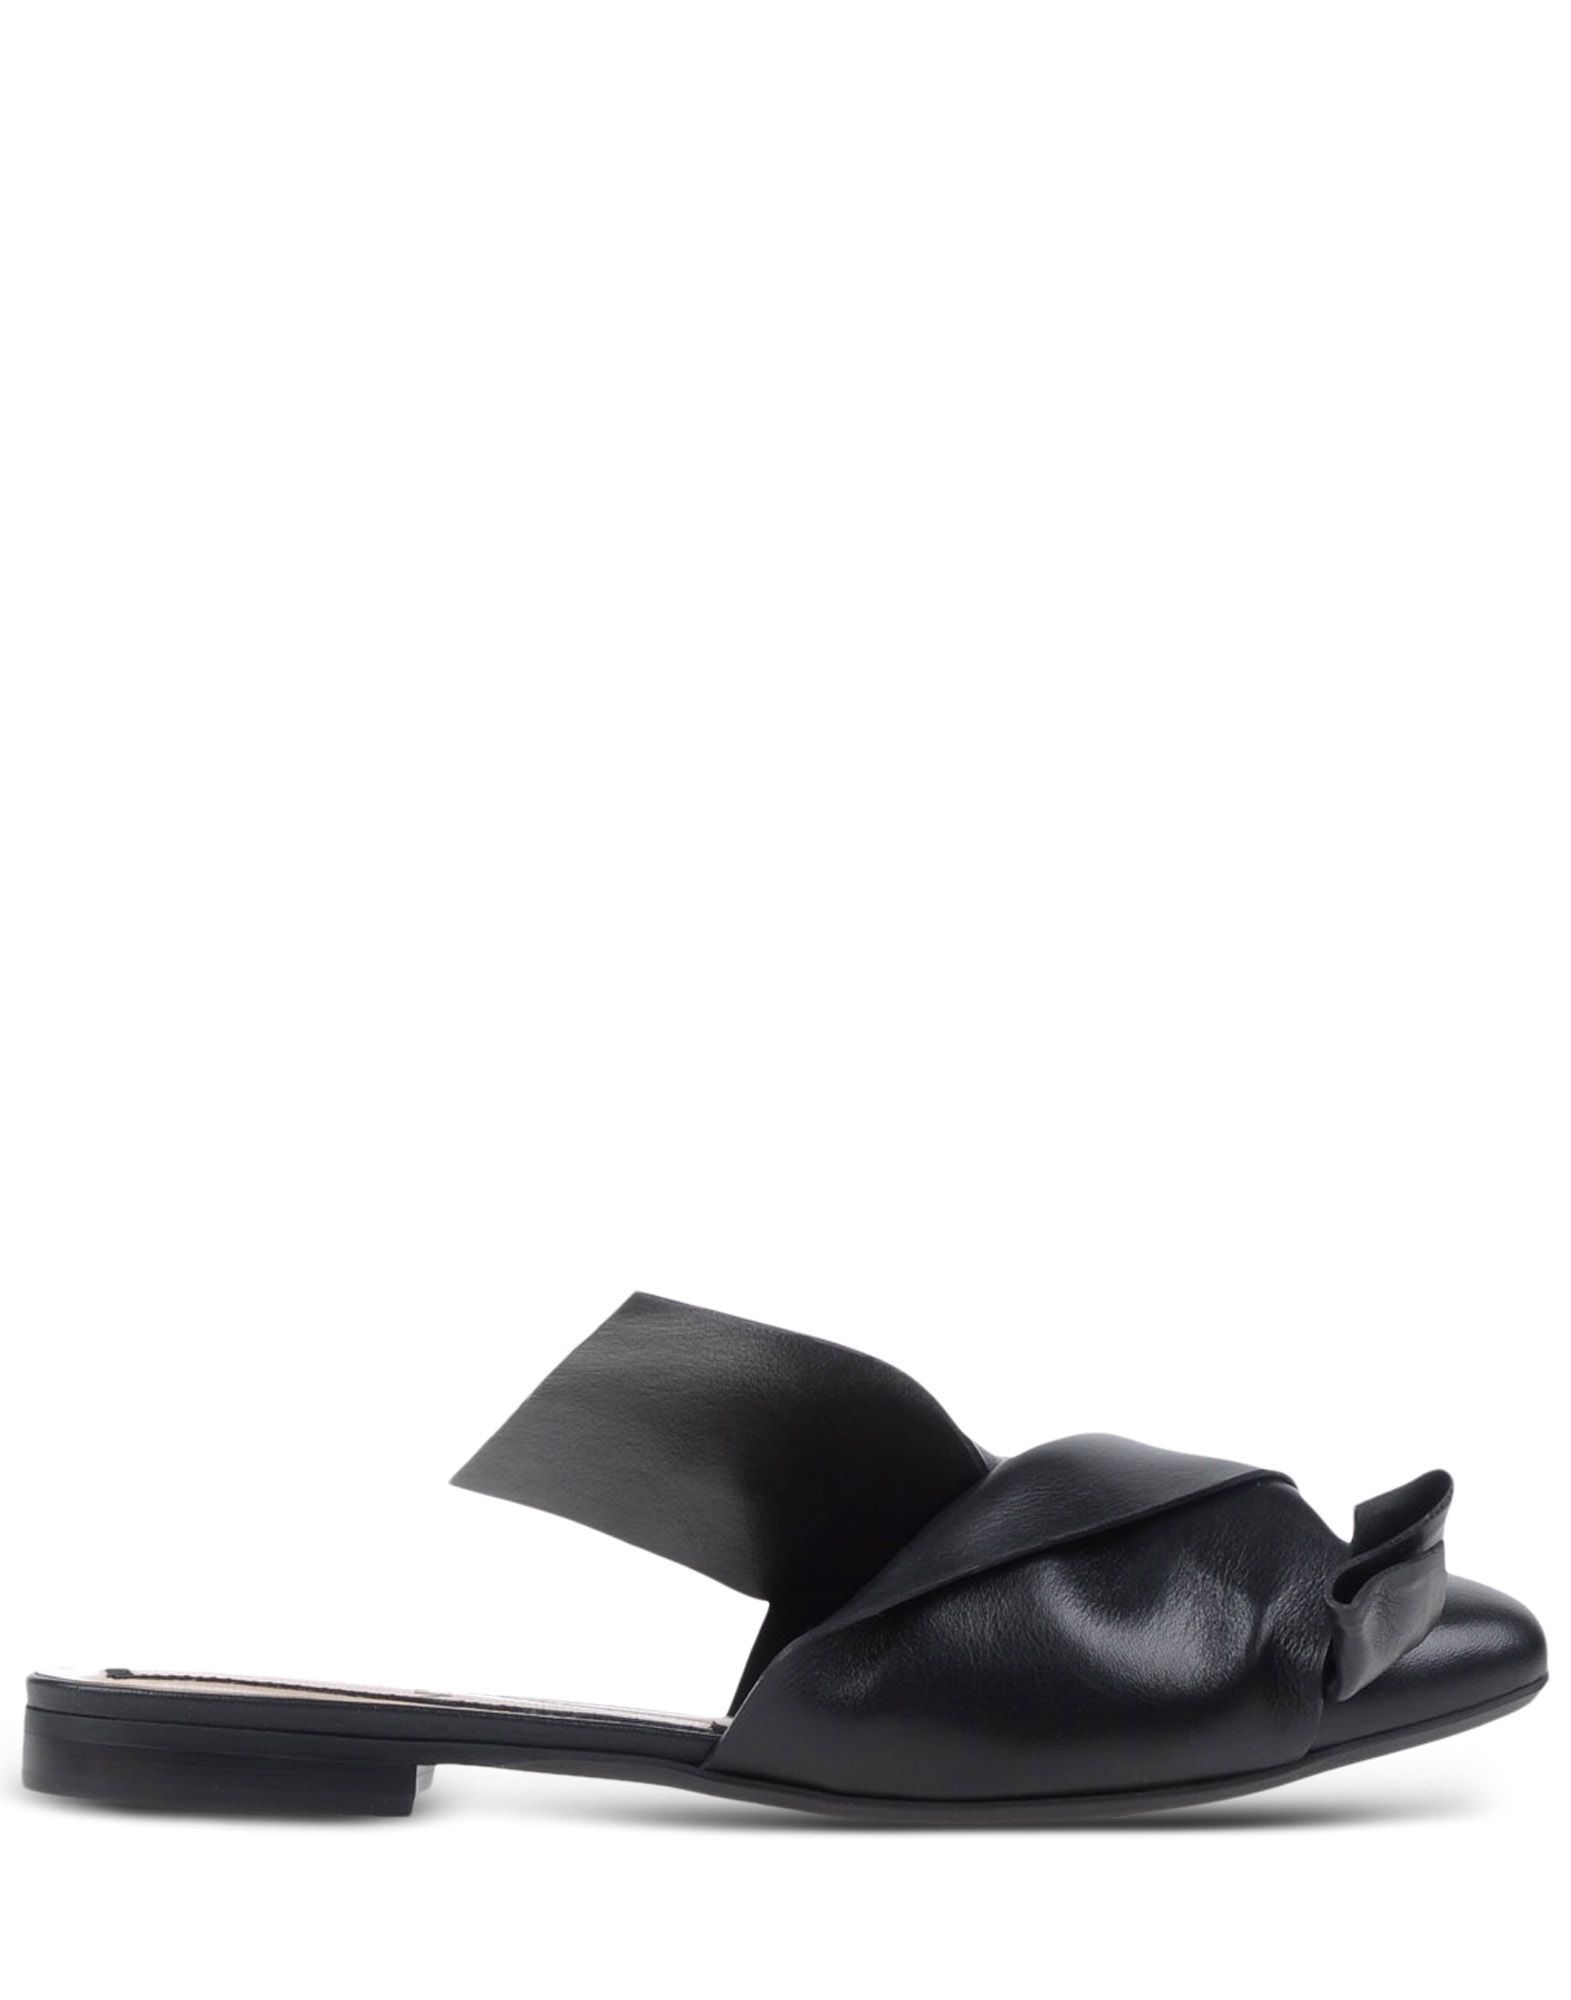 Ndegree 21 Mules & Clogs - Item 44993617 | Shoe Scribe